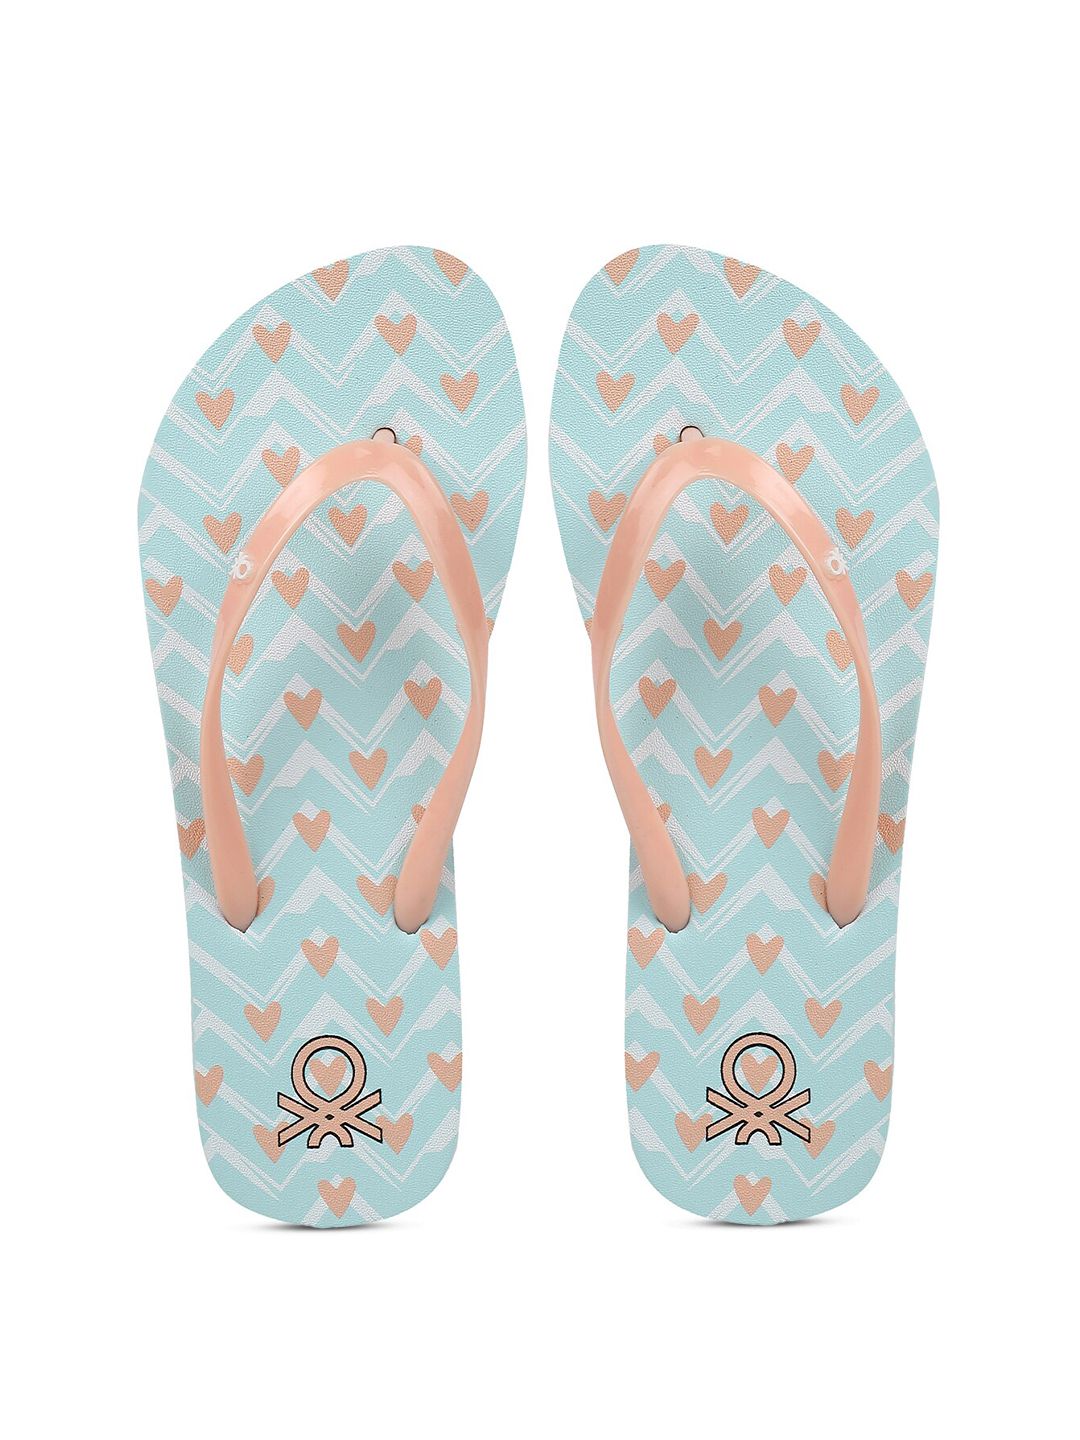 United Colors of Benetton Women Sea Green & Peach-Coloured Printed Rubber Thong Flip-Flops Price in India